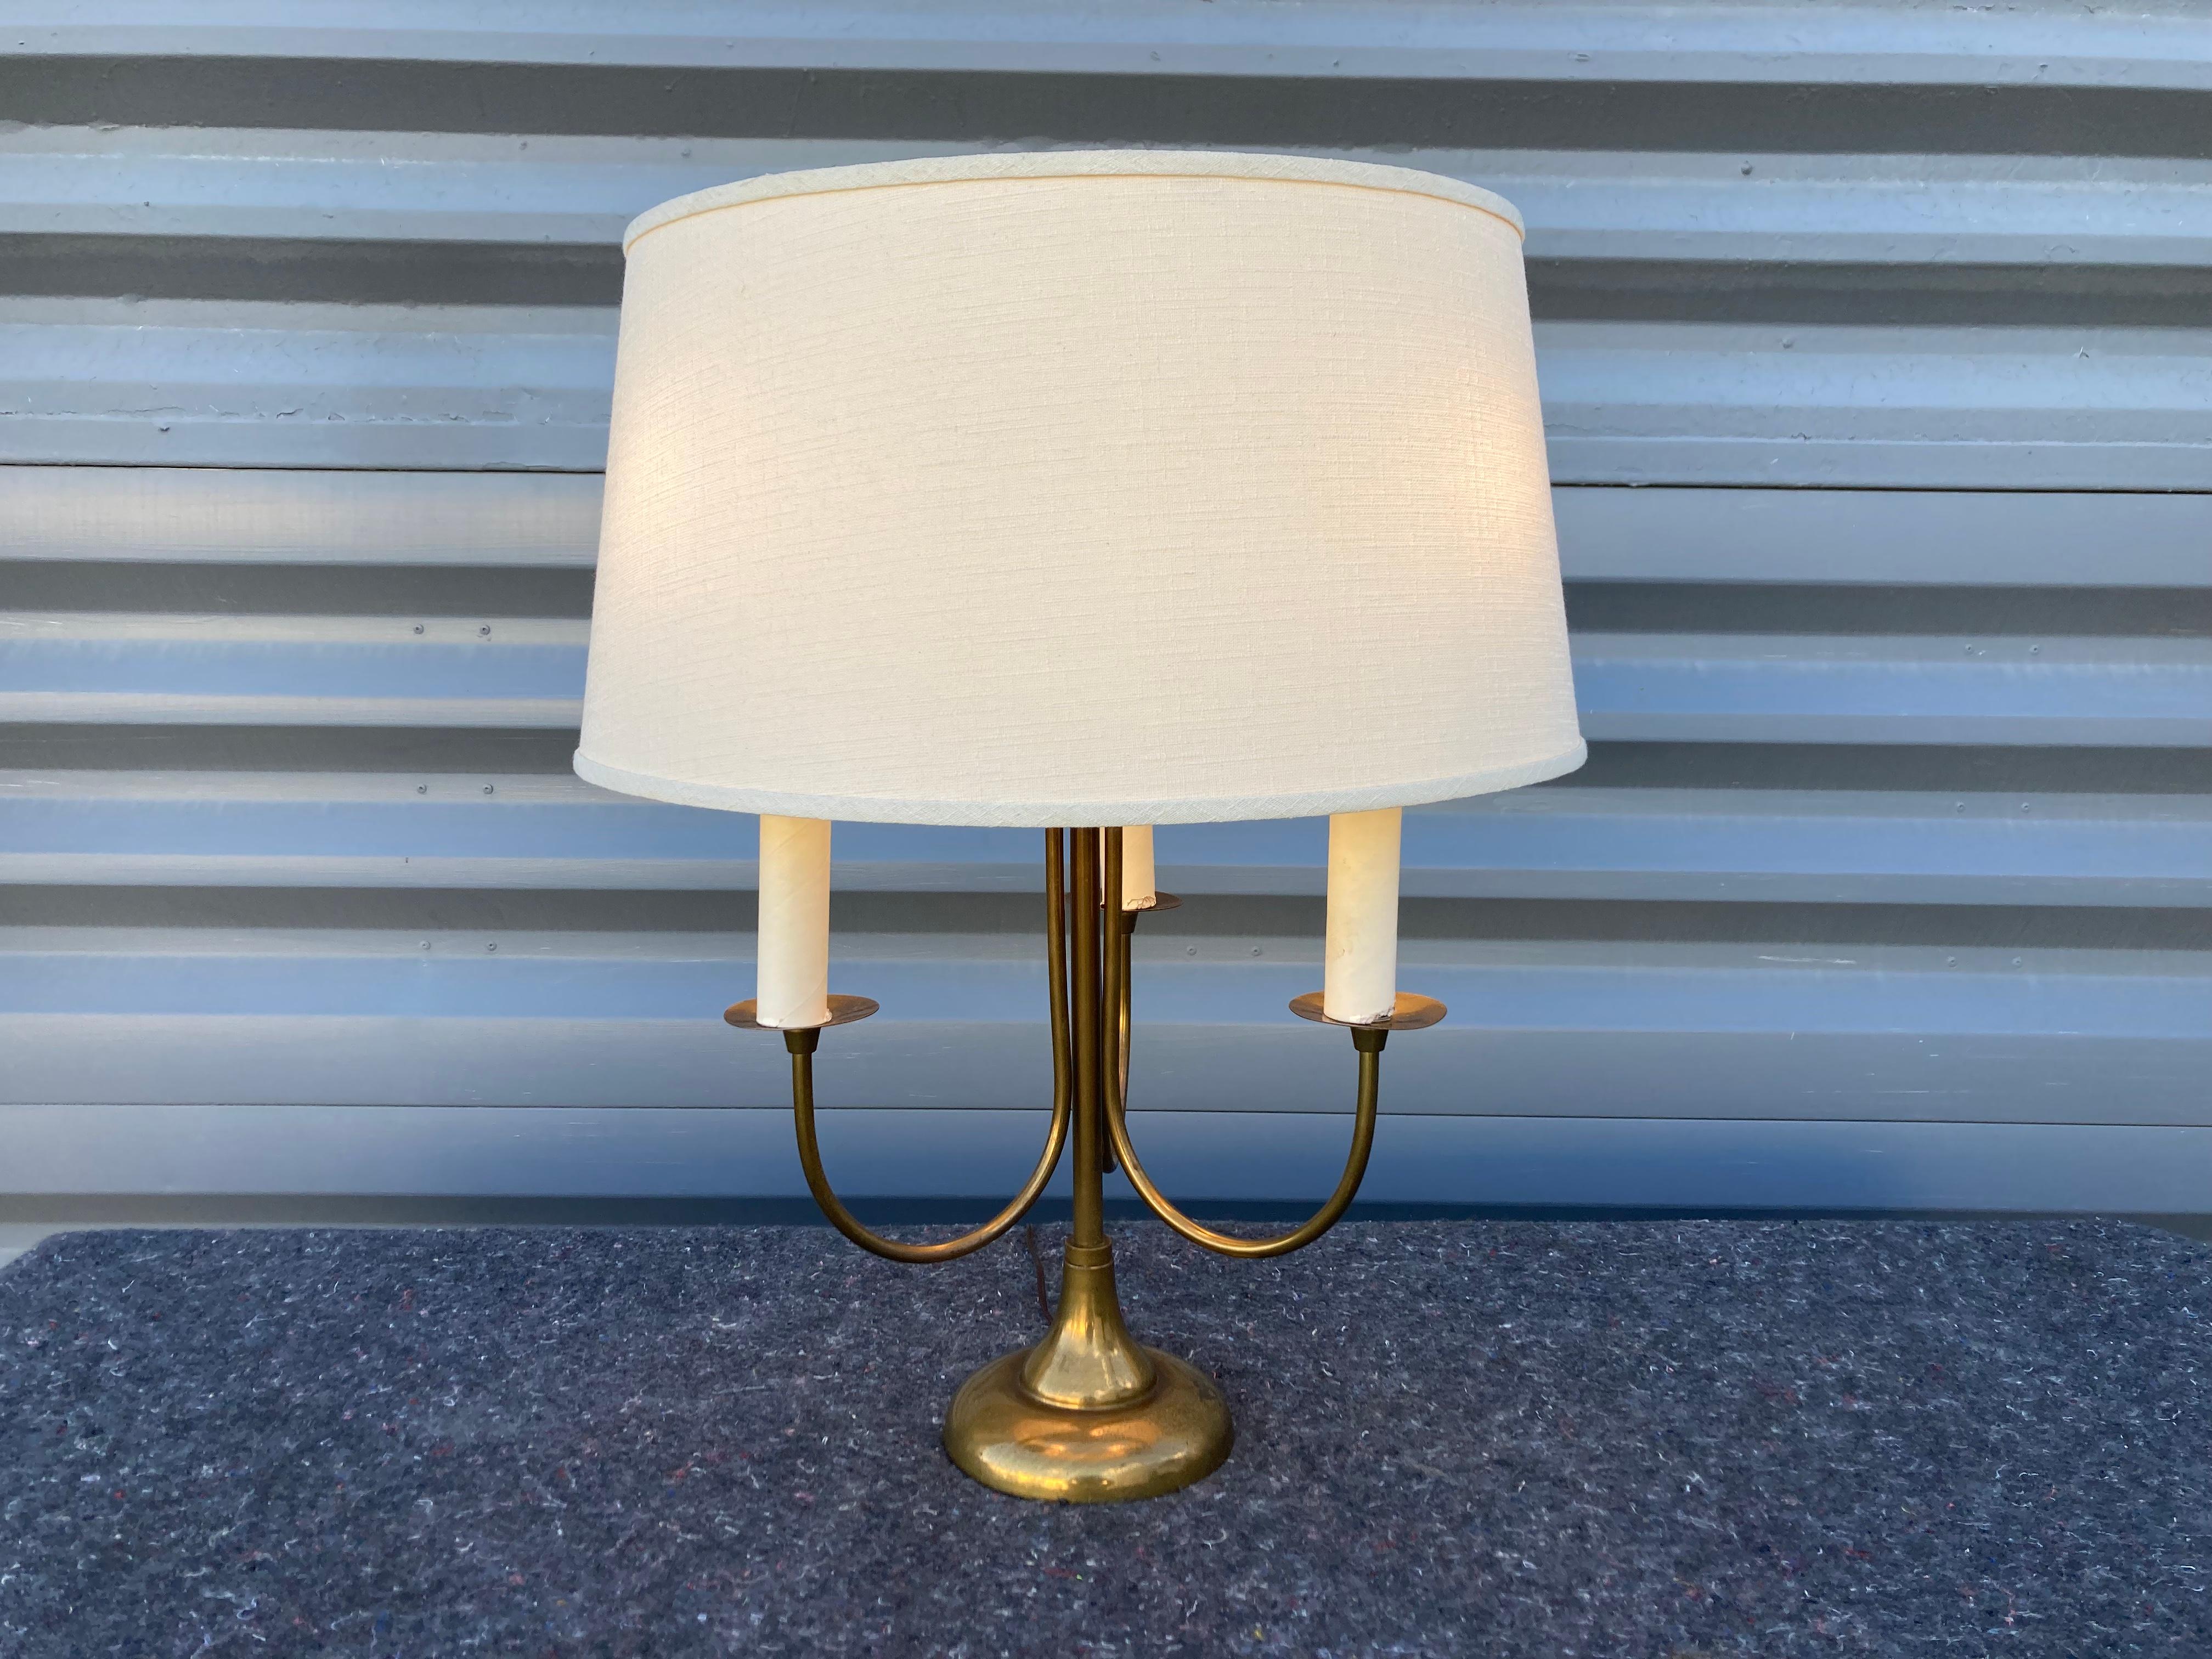 Pair of Mid-Century Modern Table Lamps, Brass, USA, 1950s For Sale 7